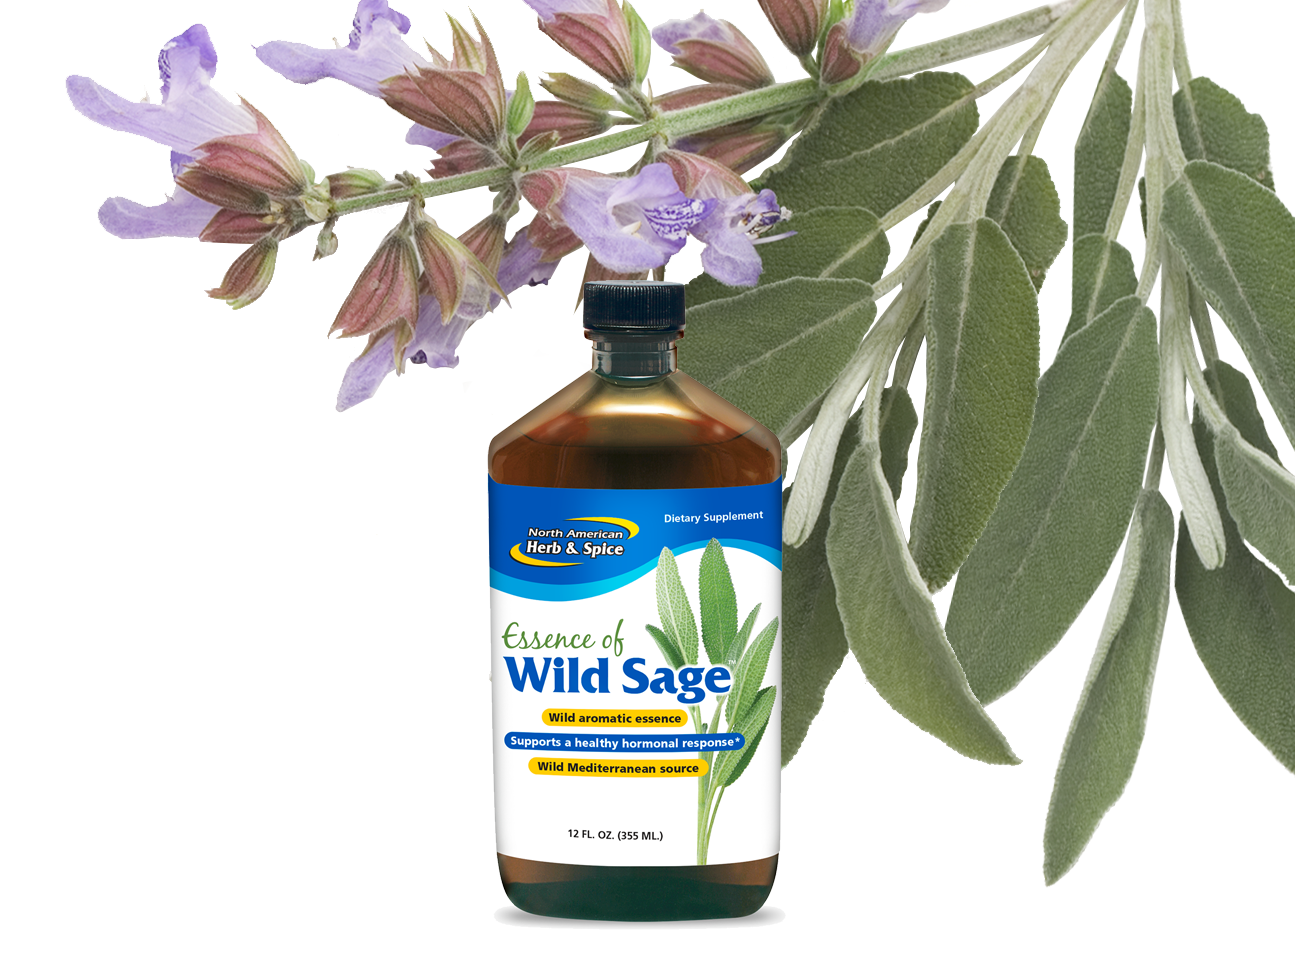 Sage ingredient with Essence of Wild Sage product